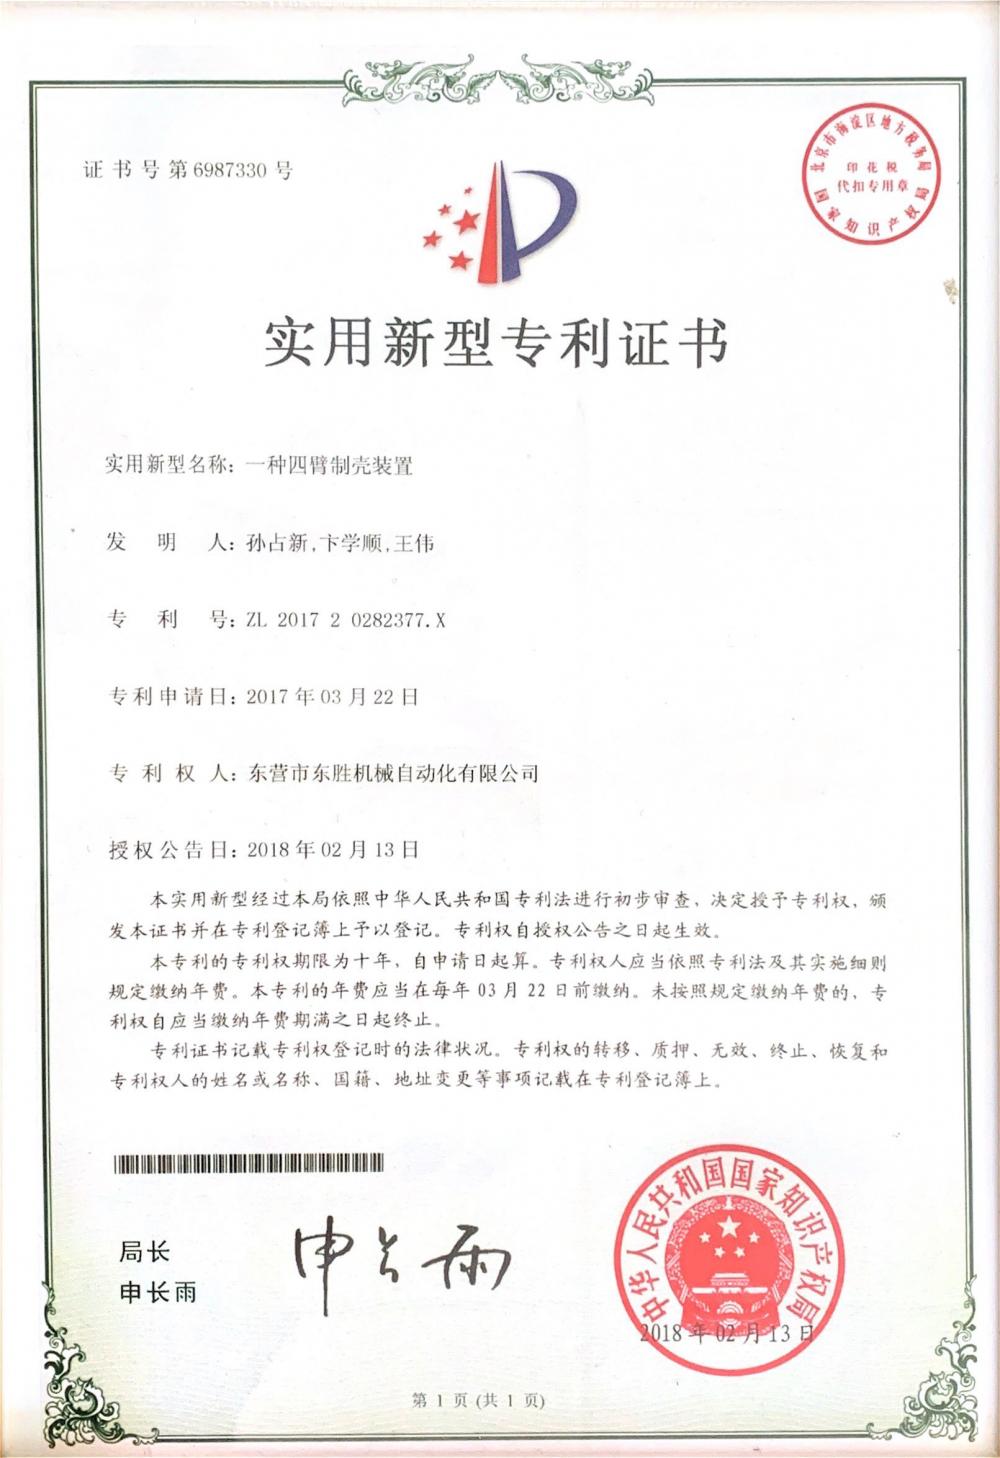 patent certificate of four arm robot